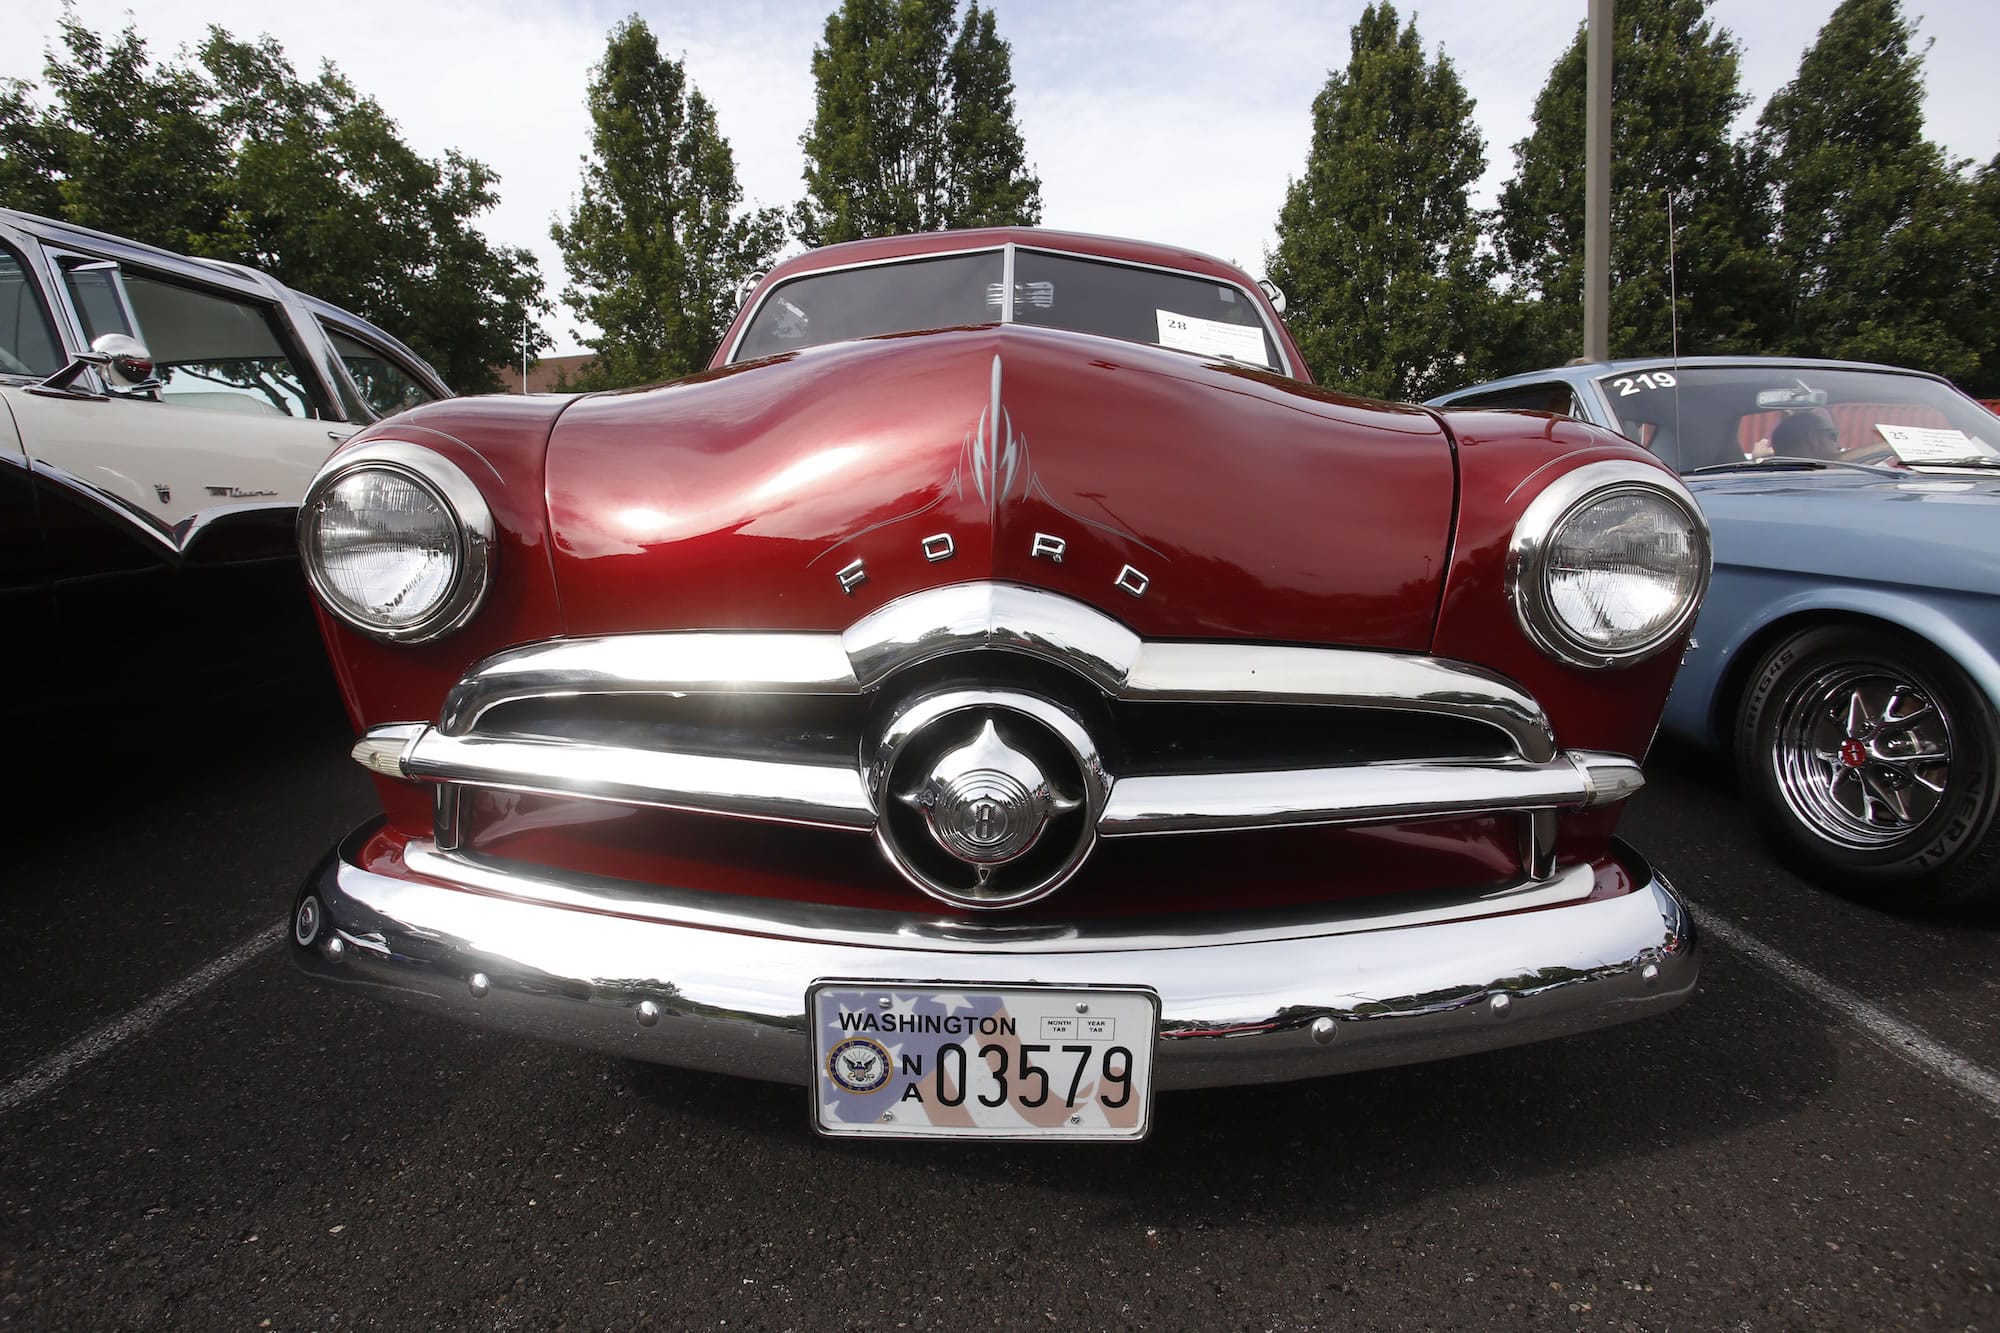 1949 Ford Custom owned by Jerry Eurich on display at the First Evangelical Church Hot Rods and Hot Dogs event.